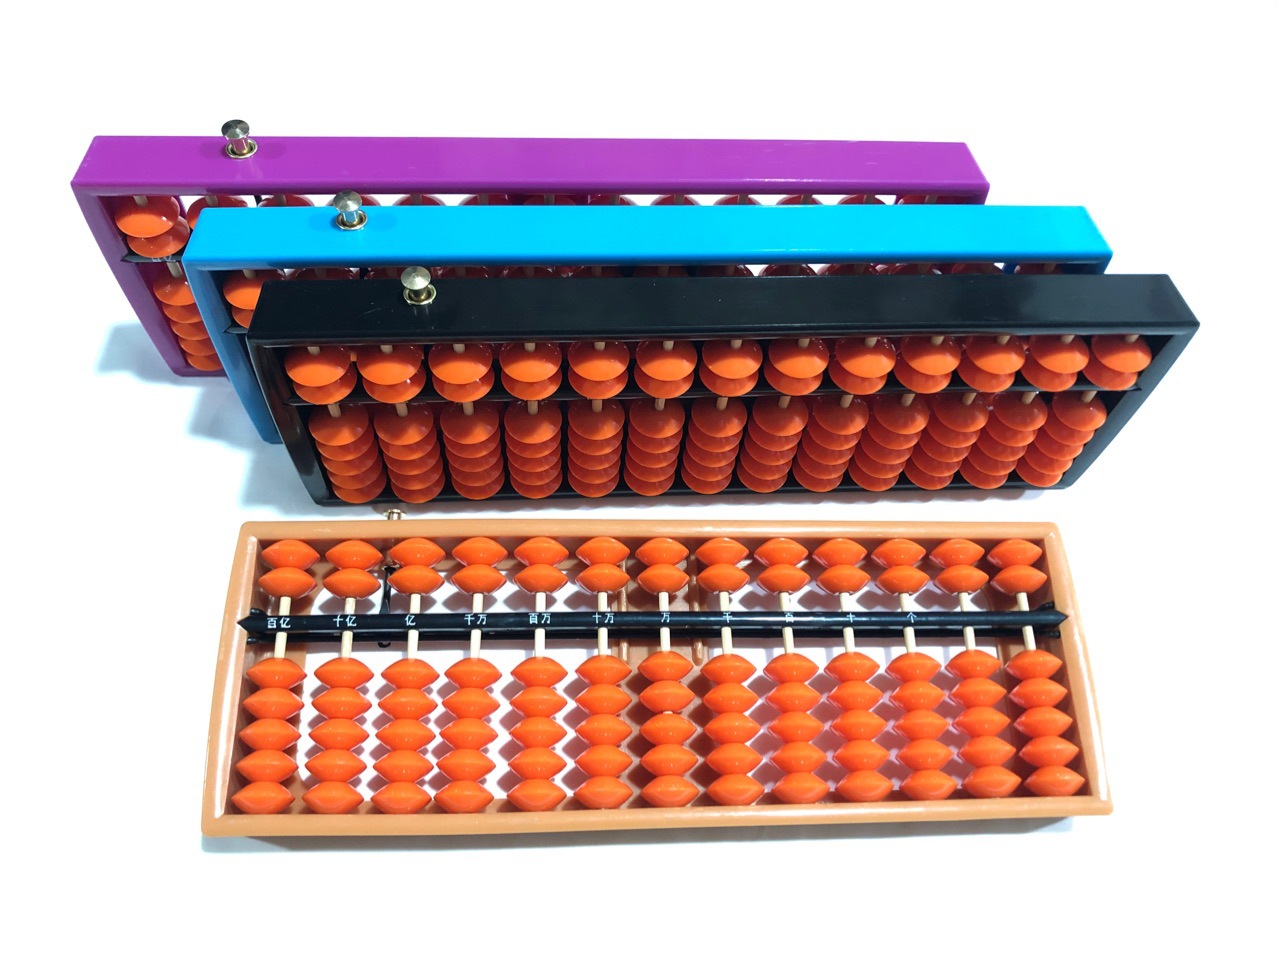 13 children pupil Plastic Calculator reset Winding up 7 Abacus beads wholesale